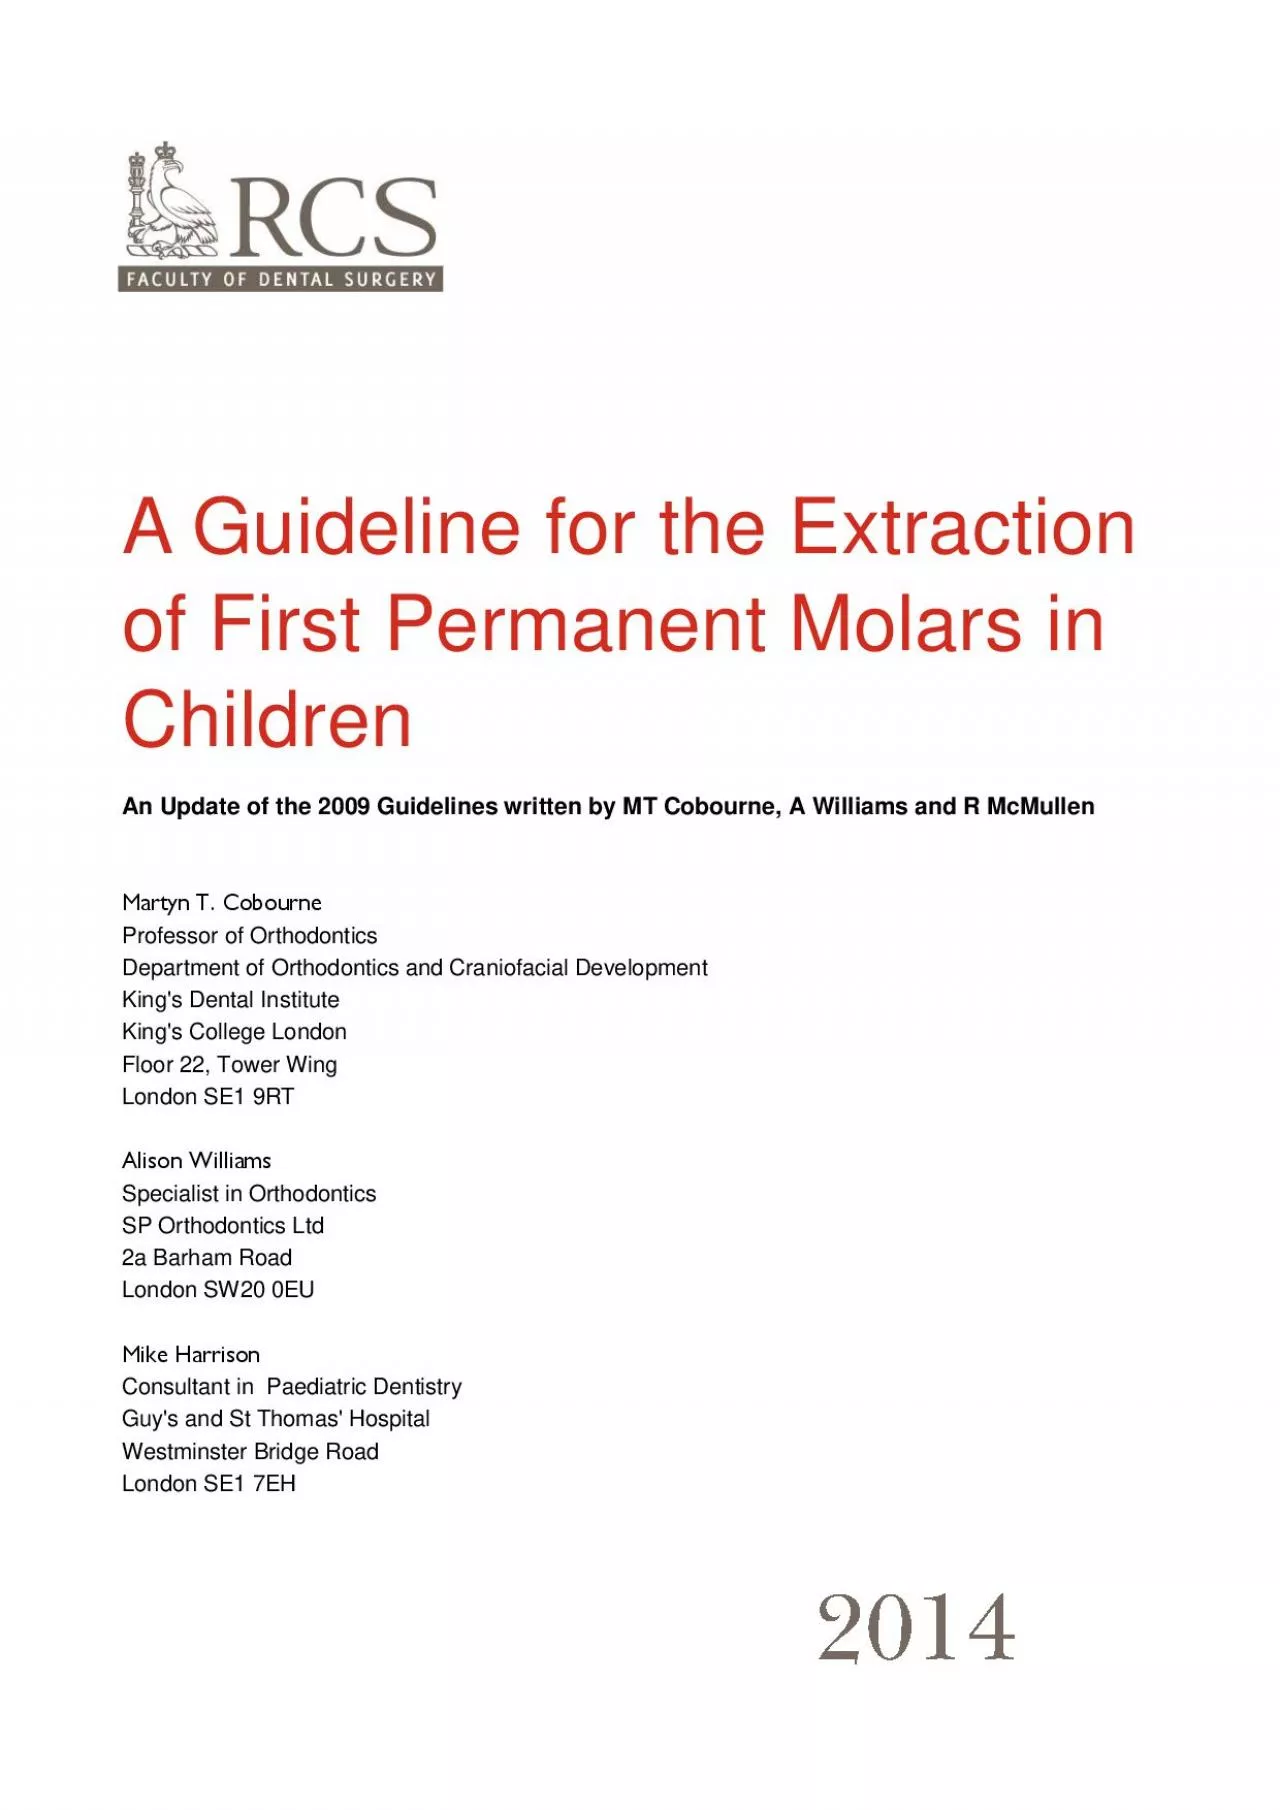 A Guideline for the Extraction